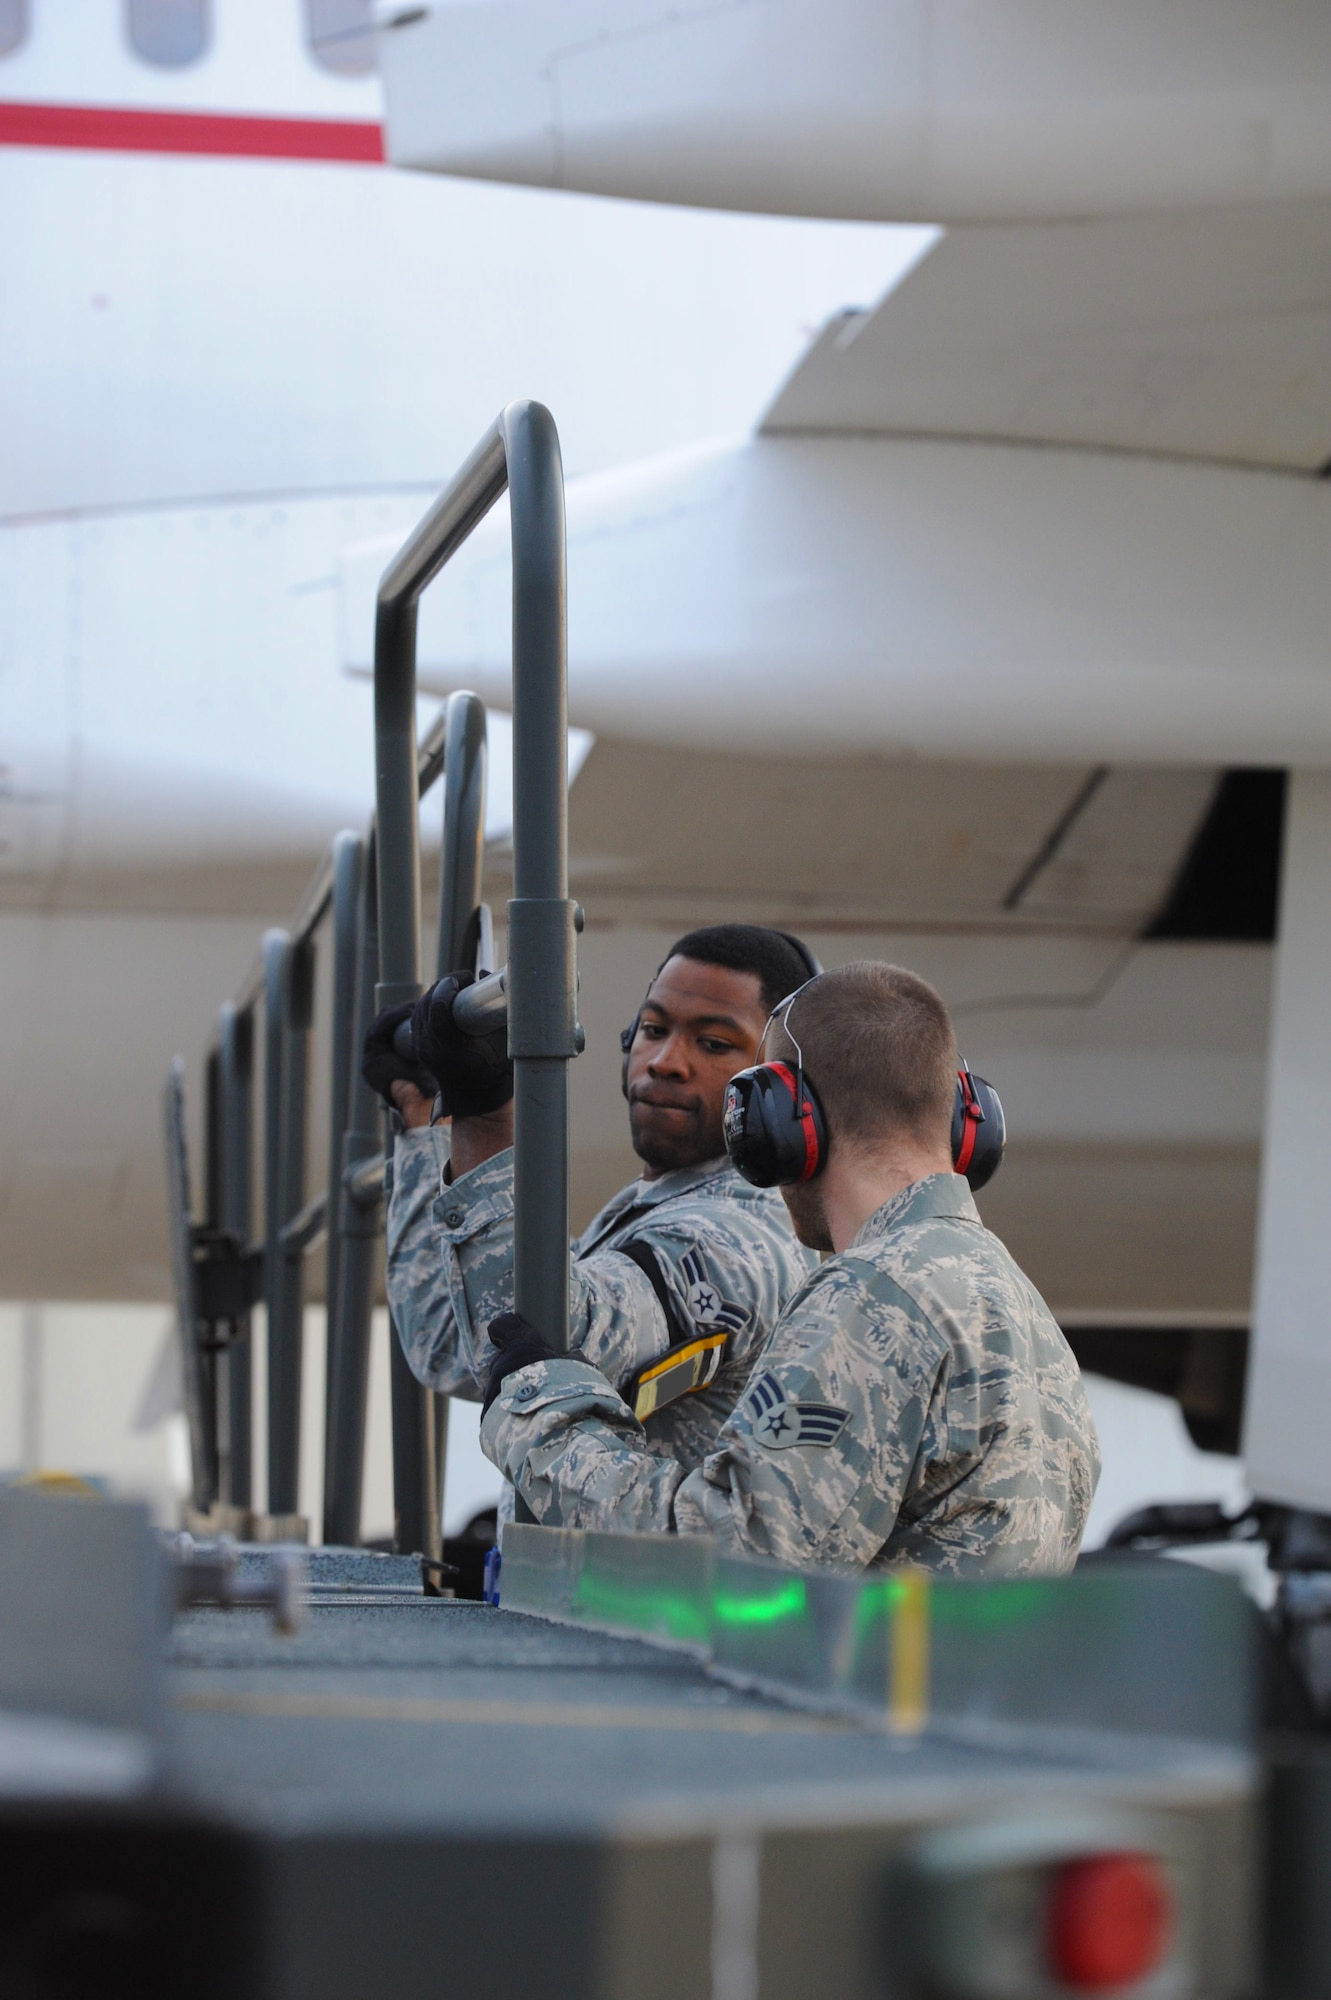 Senior Airman Vance Carter and Airman 1st Class Christen Andrews, 728th Air Mobility Squadron aircraft services, prepare a 60k loader to download cargo boxes from a French air force Airbus A310 Jan. 9, 2014, at Incirlik Air Base, Turkey. The French air force provided personnel and cargo airlift to the German military as they deployed troops to Turkey where they will assume responsibility for manning two Patriot missile batteries as part of a NATO mission to increase Turkey’s air defense capabilities against Syrian ballistic missile threats. (U.S. Air Force photo by 1st Lt. David Liapis/Released)